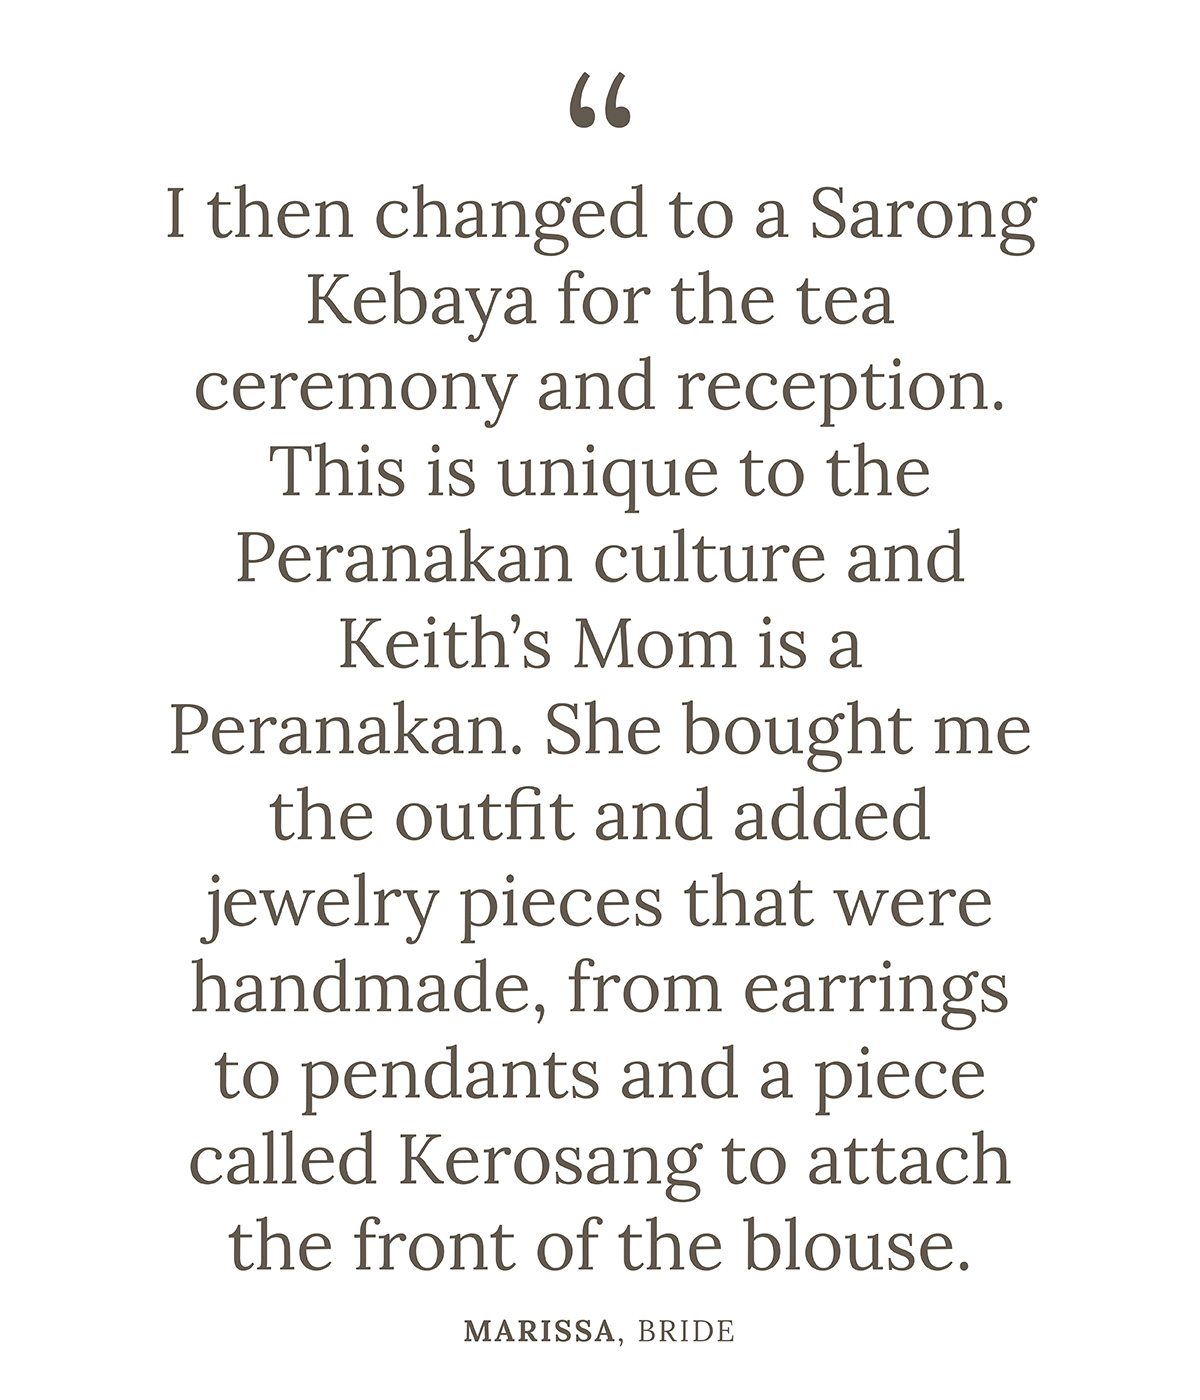 "I then changed to a Sarong Kebaya for the tea ceremony and reception. This is unique to the Peranakan culture and Keith’s Mom is a Peranakan. She bought me the outfit and added jewelry pieces that were handmade, from earrings to pendants and a piece called Kerosang to attach the front of the blouse." Marissa, Bride